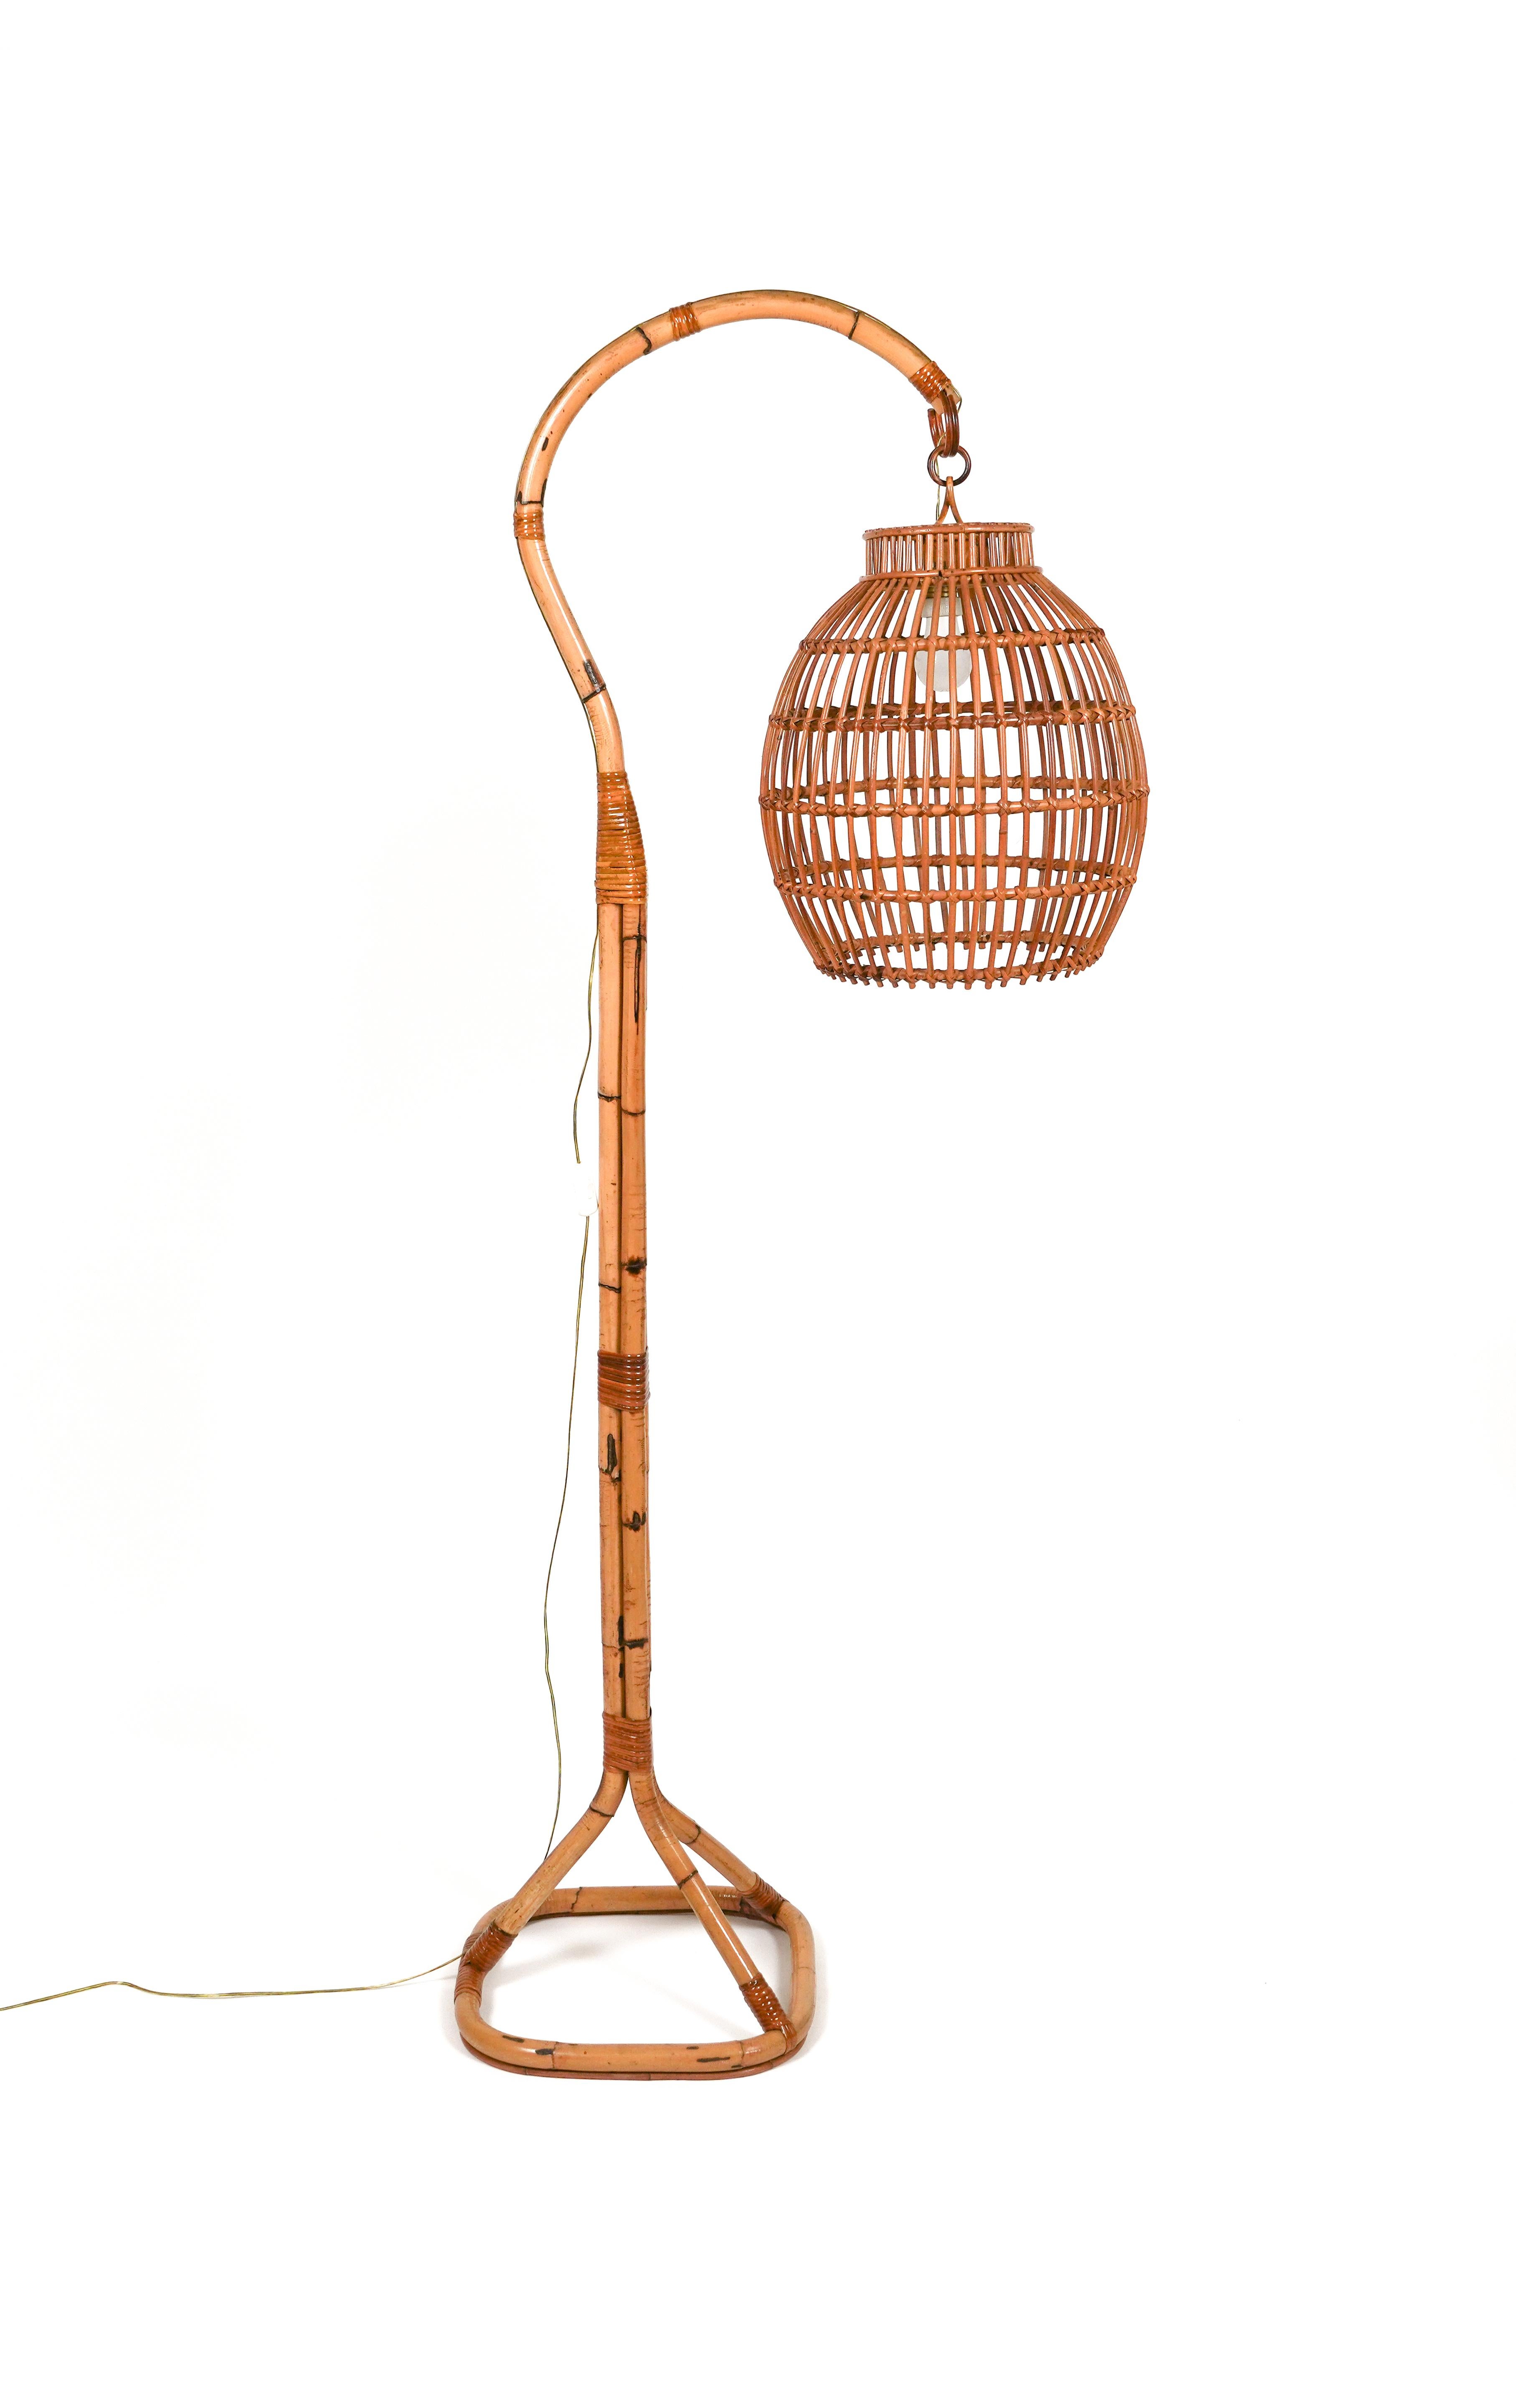 Midcentury amazing floor Lamp in bamboo and rattan in the style of Louis Sognot.

Made in Italy in the 1960s.

It uses 1 bulbs. 

Louis Sognot was a French designer best known for his elegant furniture made from a combination of rattan and wood.